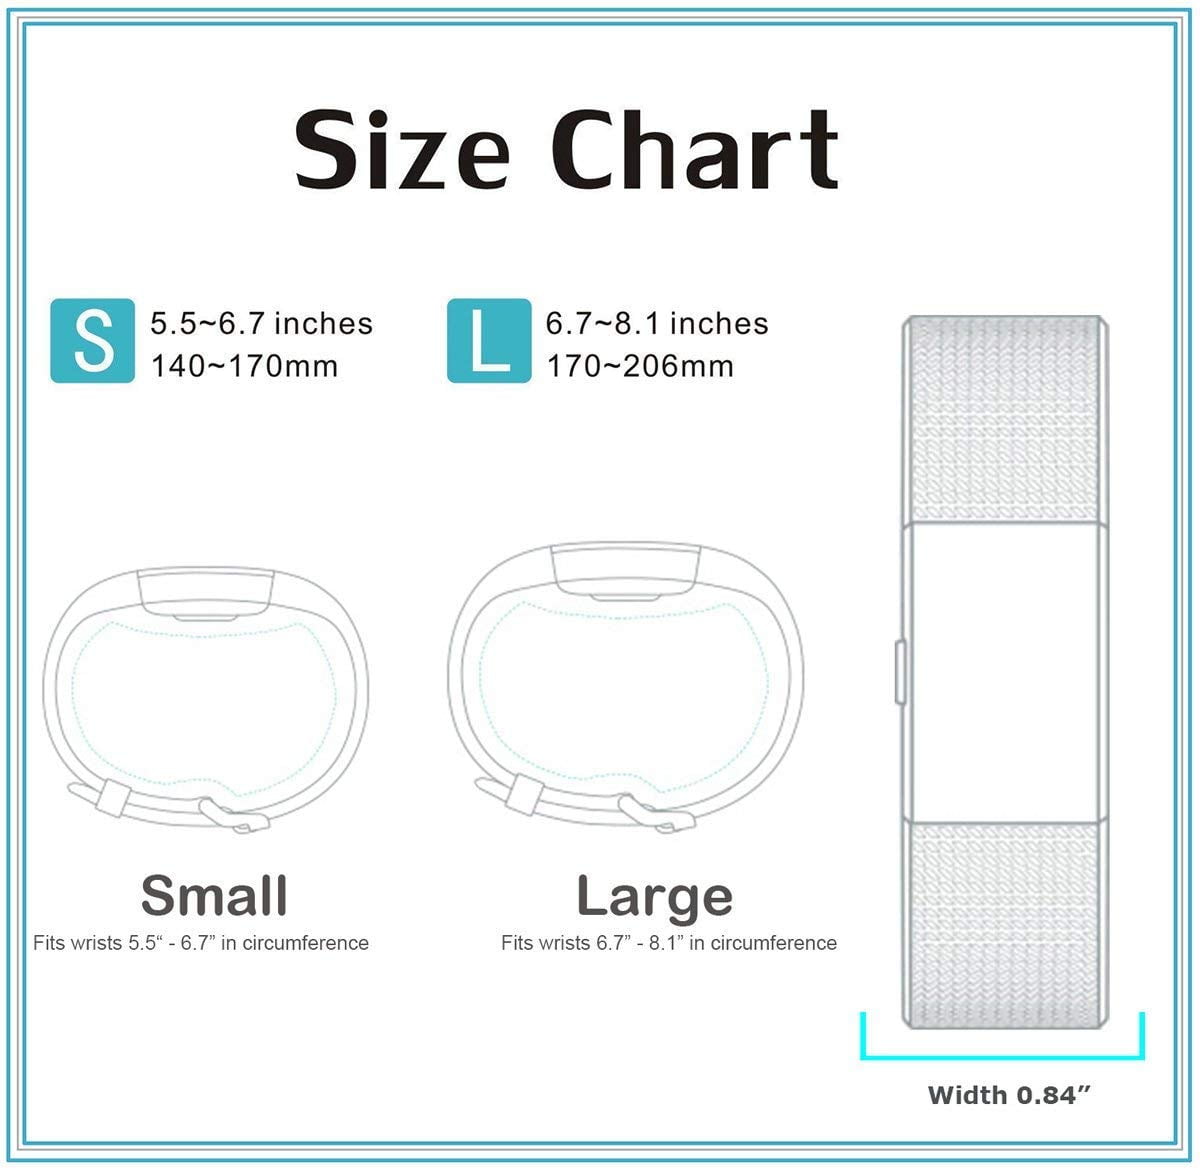 Fitbit Charge Band Size Chart